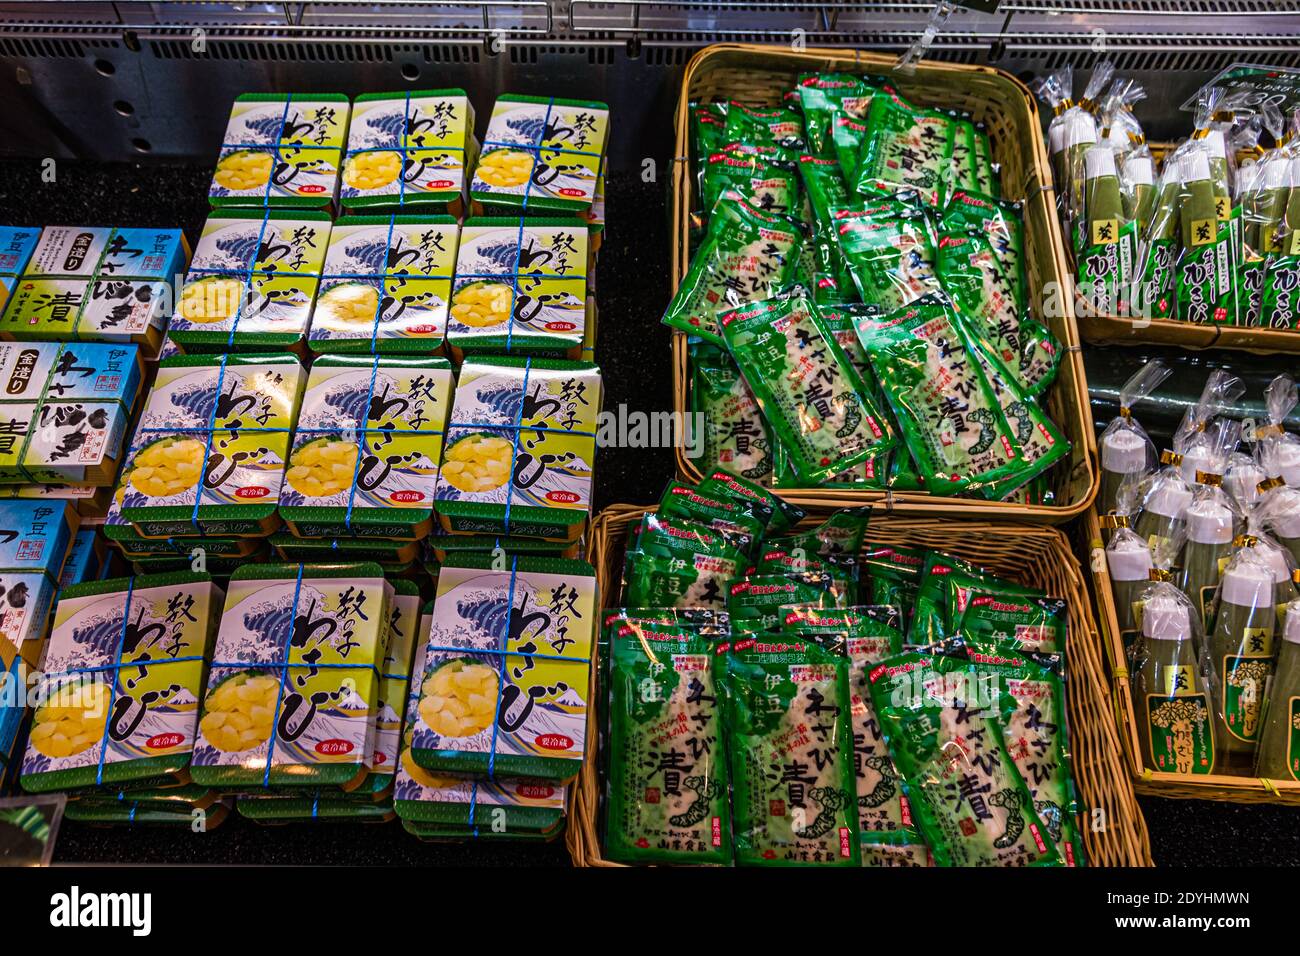 In Japan, there are many products with wasabi, including sweets, wasabi powder, wasabi salt and wasabi nuts. Stock Photo